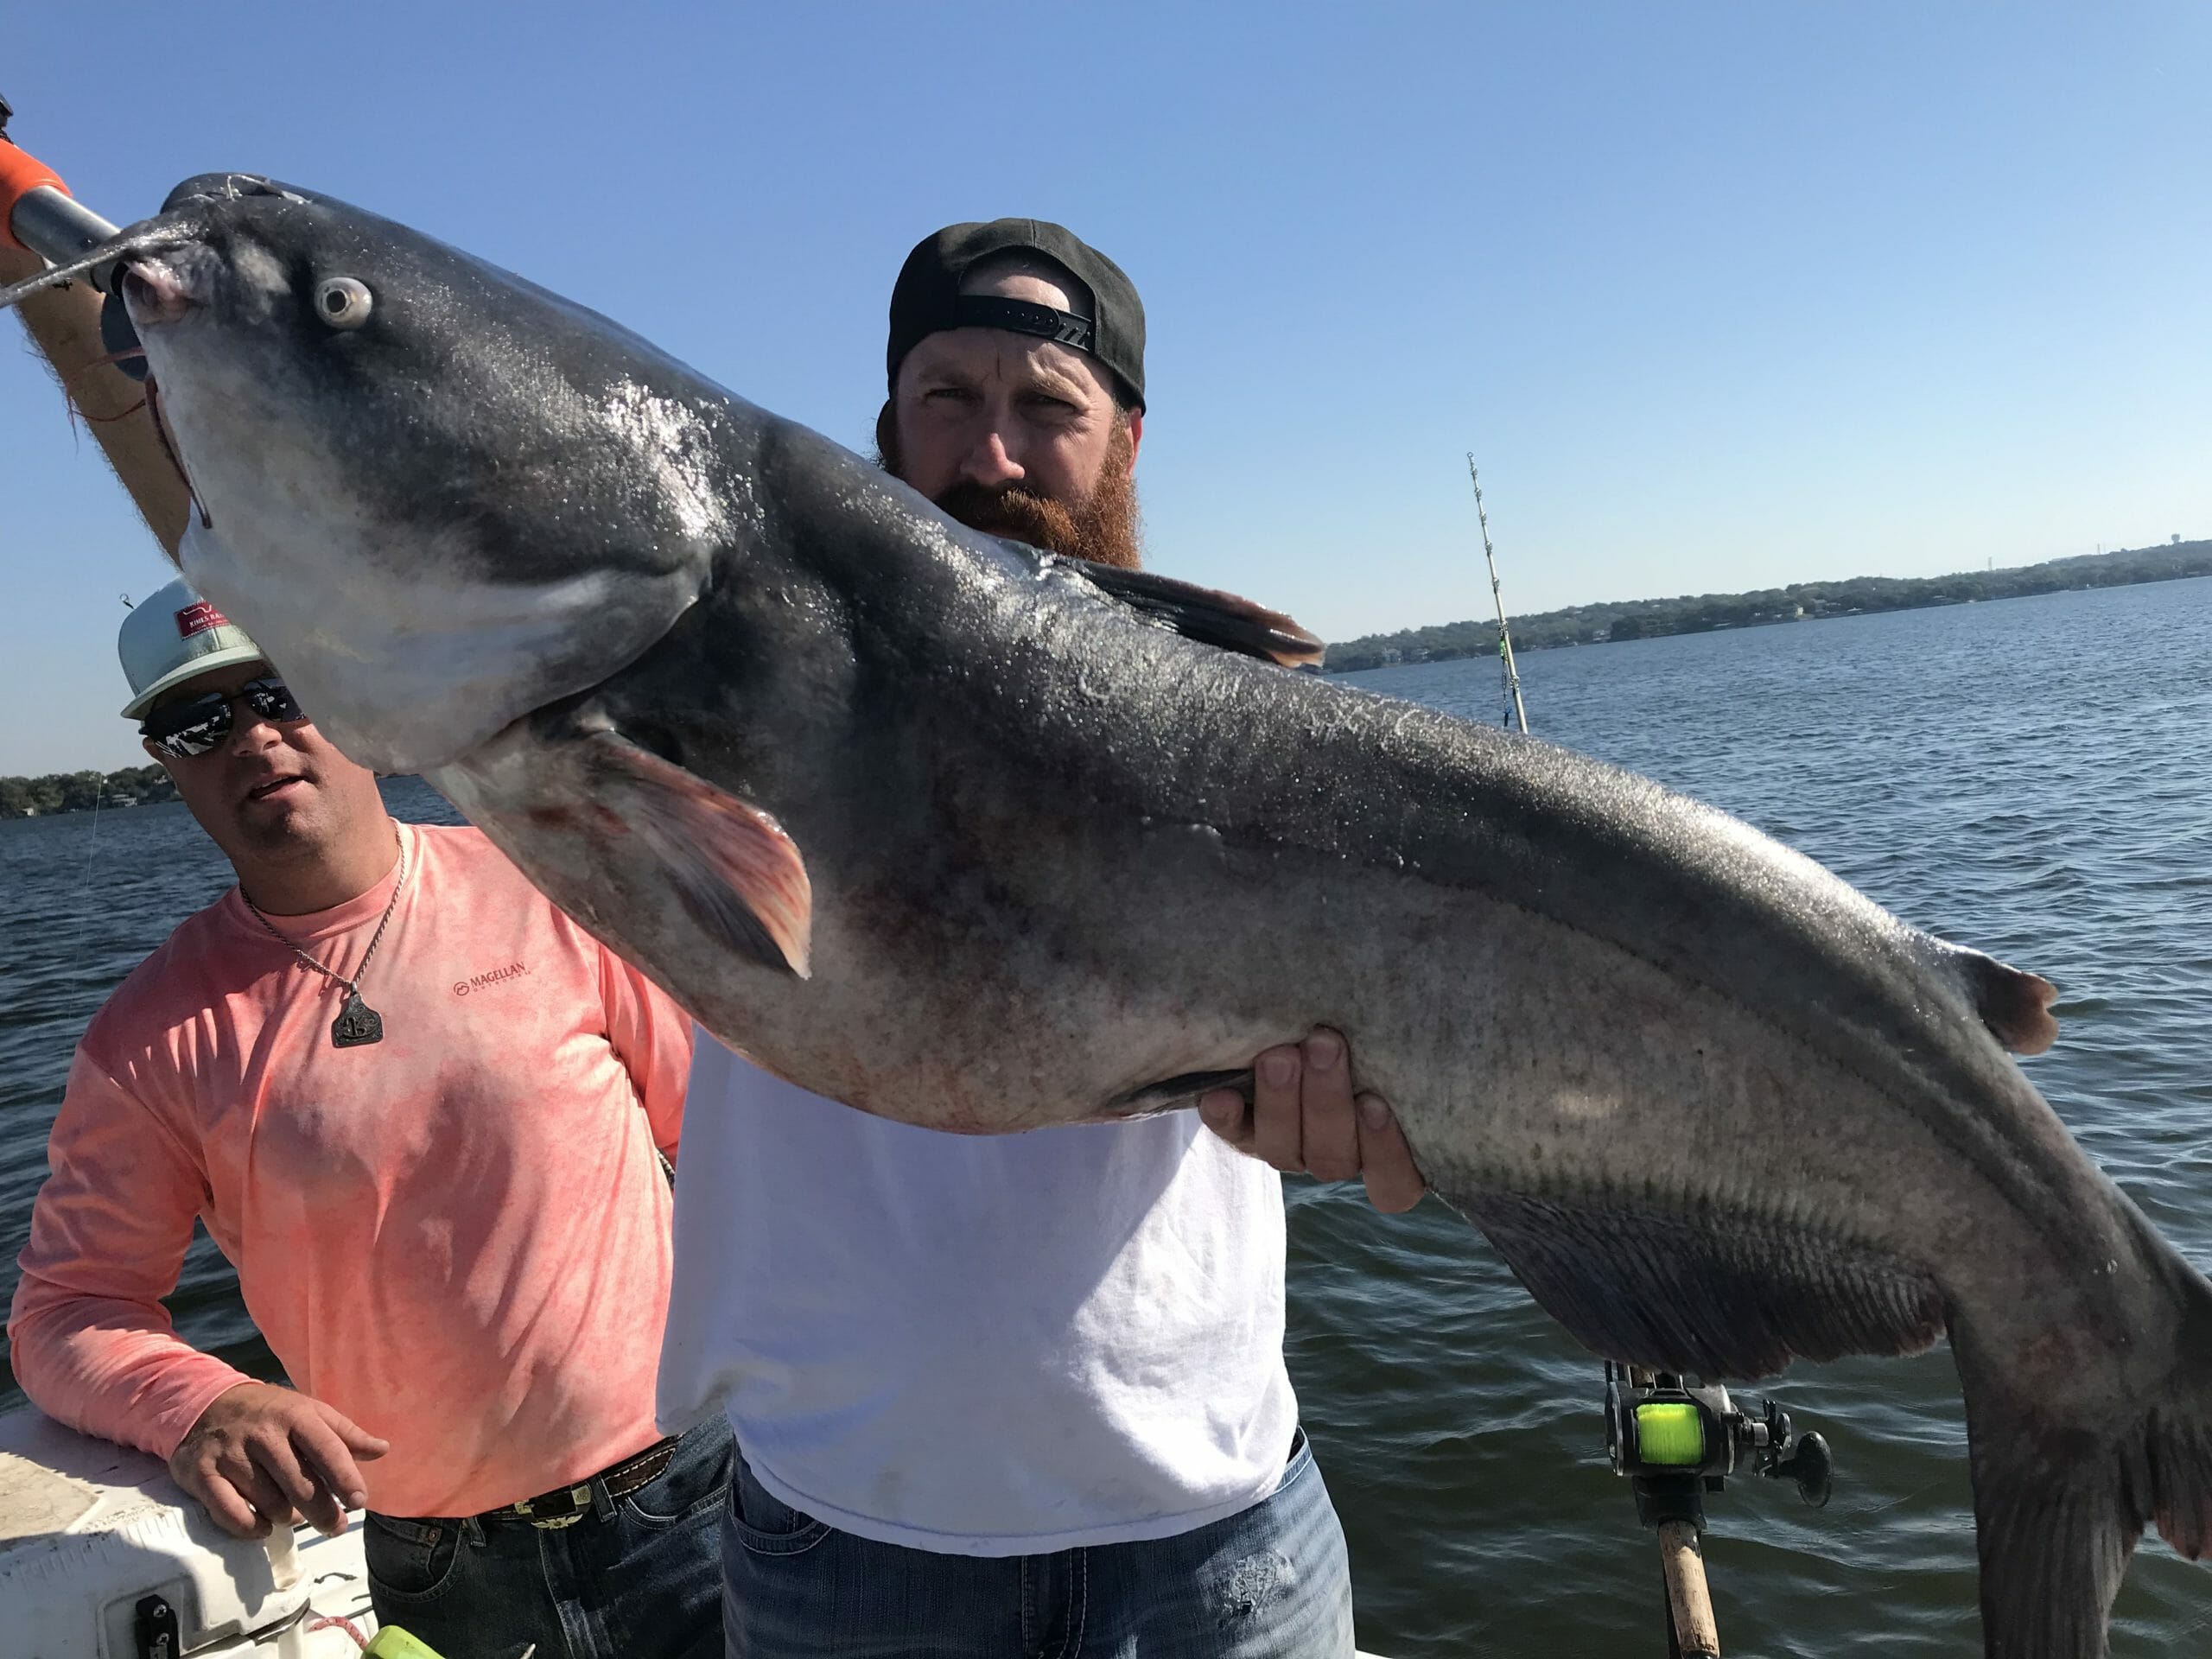 October 2021 Fishing Guide Report - North Texas Catfish Guide